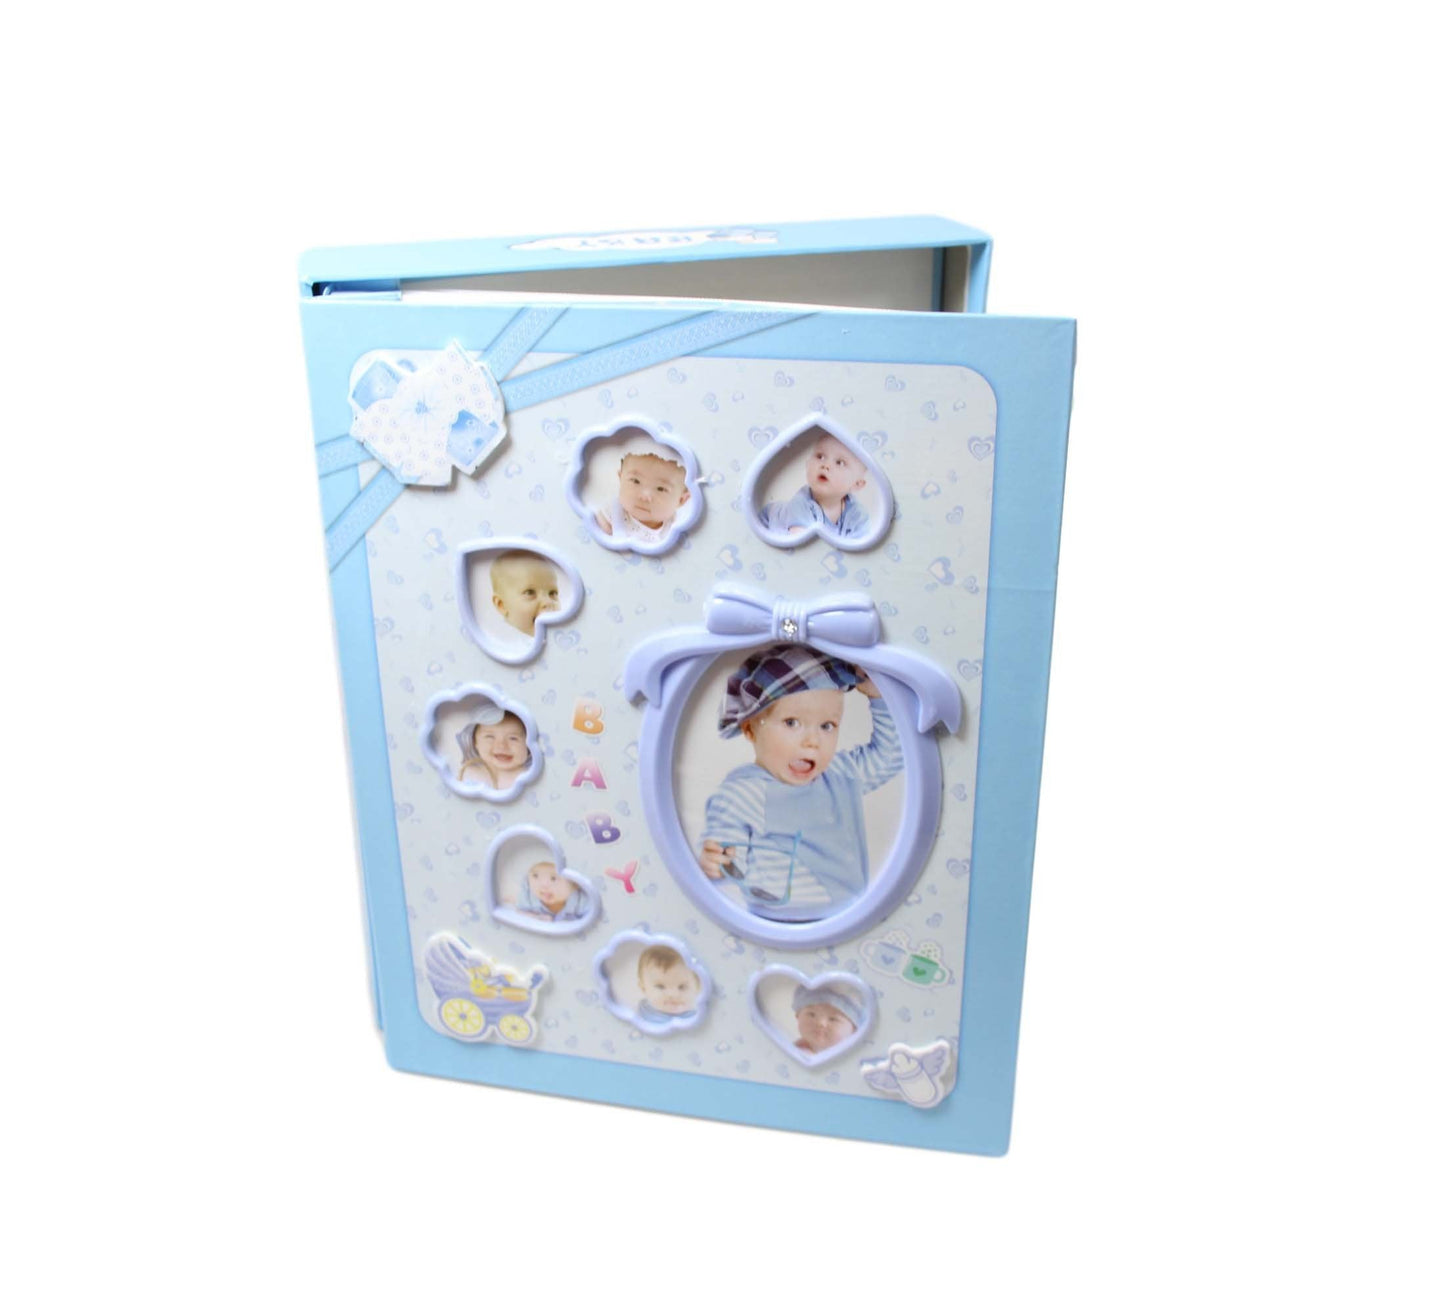 Baby First Days Boy Girl Photo Album With Hard Back Holds 120 Pictures 4" x 6" 5890 (Parcel Rate)